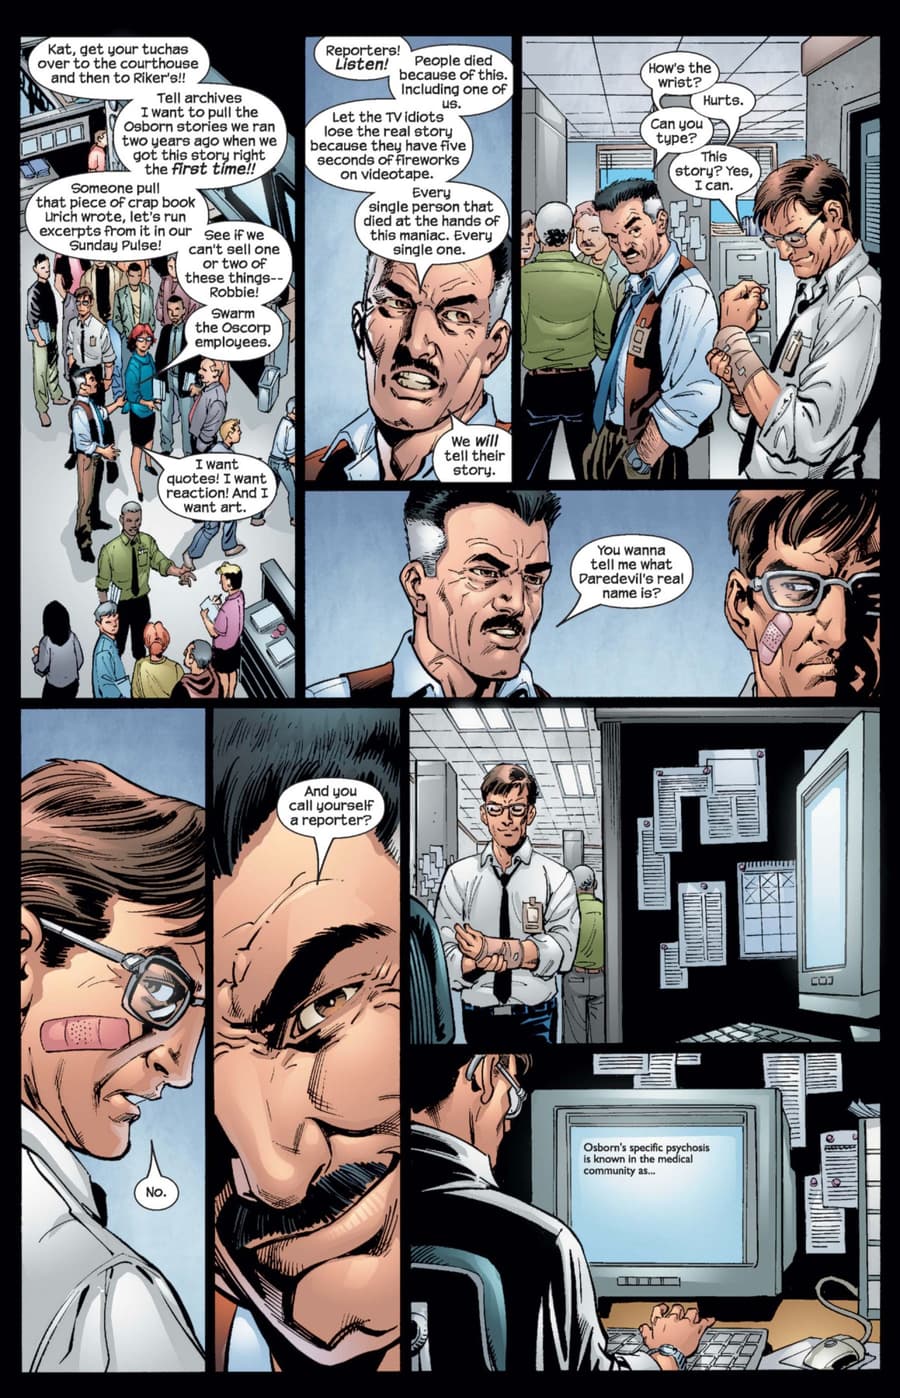 PULSE (2004) #5 page by Brian Michael Bendis and Mark Bagley